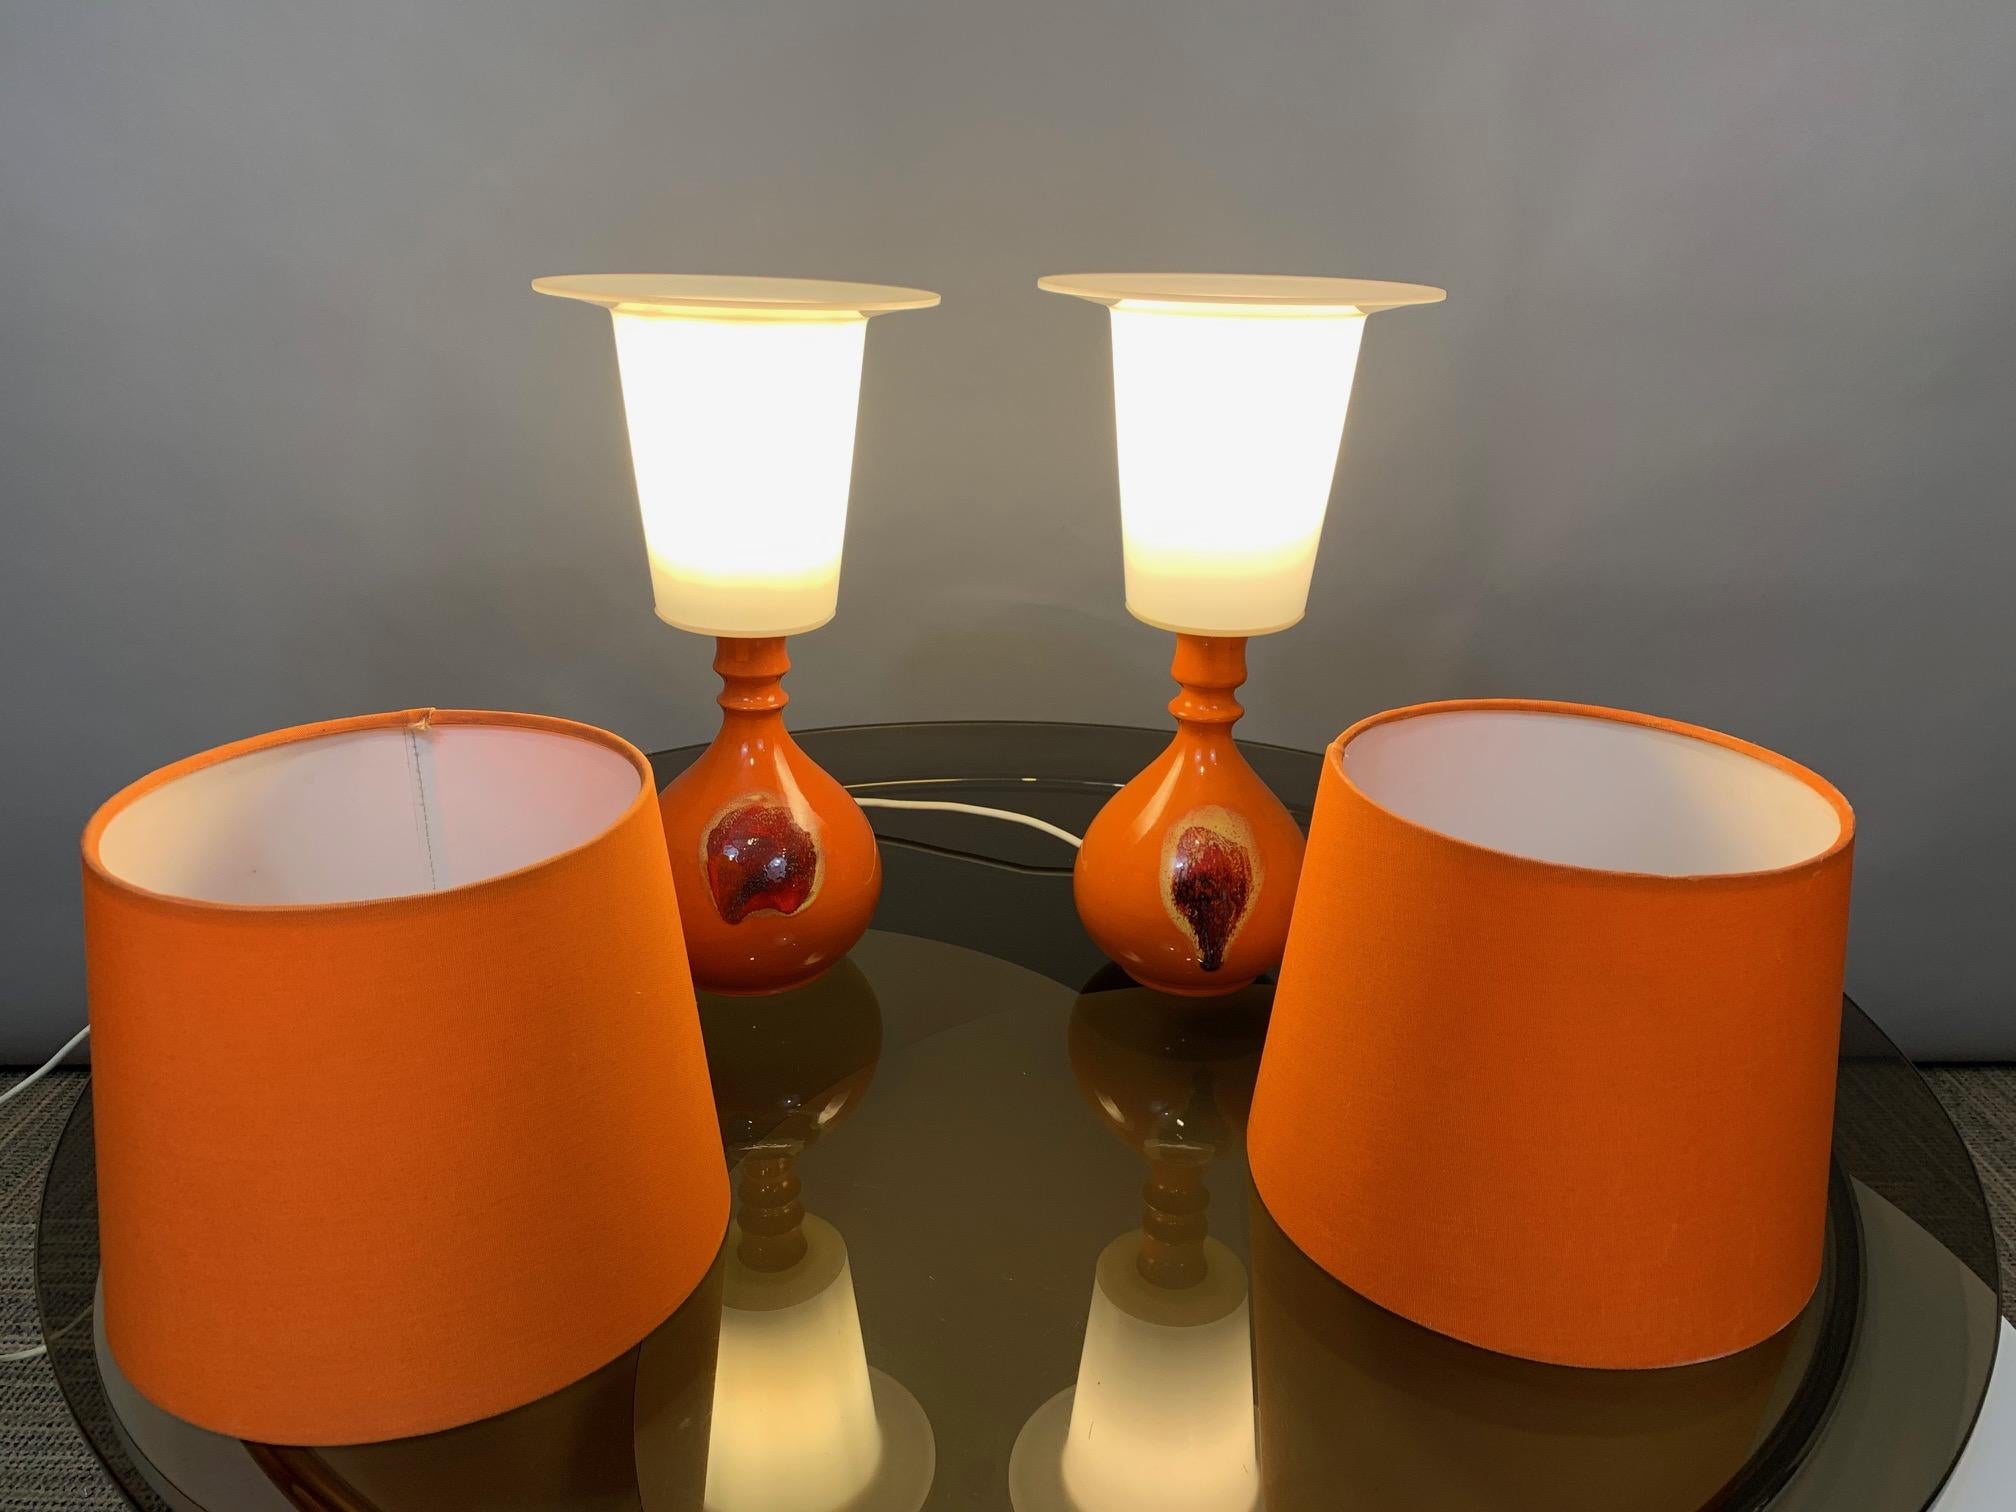 A pair of small 1970s German Rosenthal 'Studio Line' orange glazed ceramic lamps including their original shades with white plastic interiors. Designed by Bjørn Wiinblad for Rosenthal • Studio Line in Germany. The lamps are stamped on the hole where